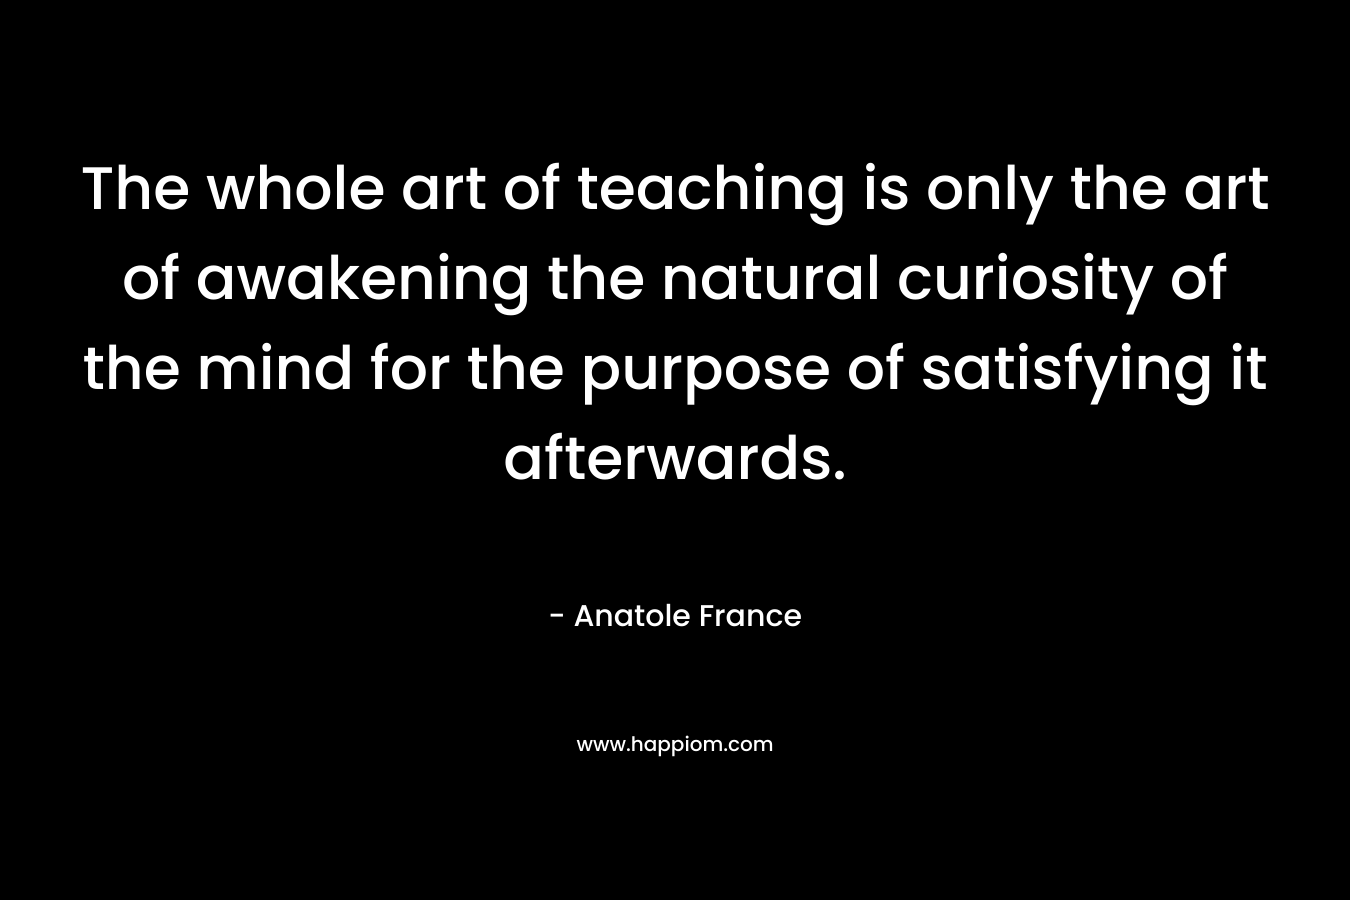 The whole art of teaching is only the art of awakening the natural curiosity of the mind for the purpose of satisfying it afterwards. – Anatole France